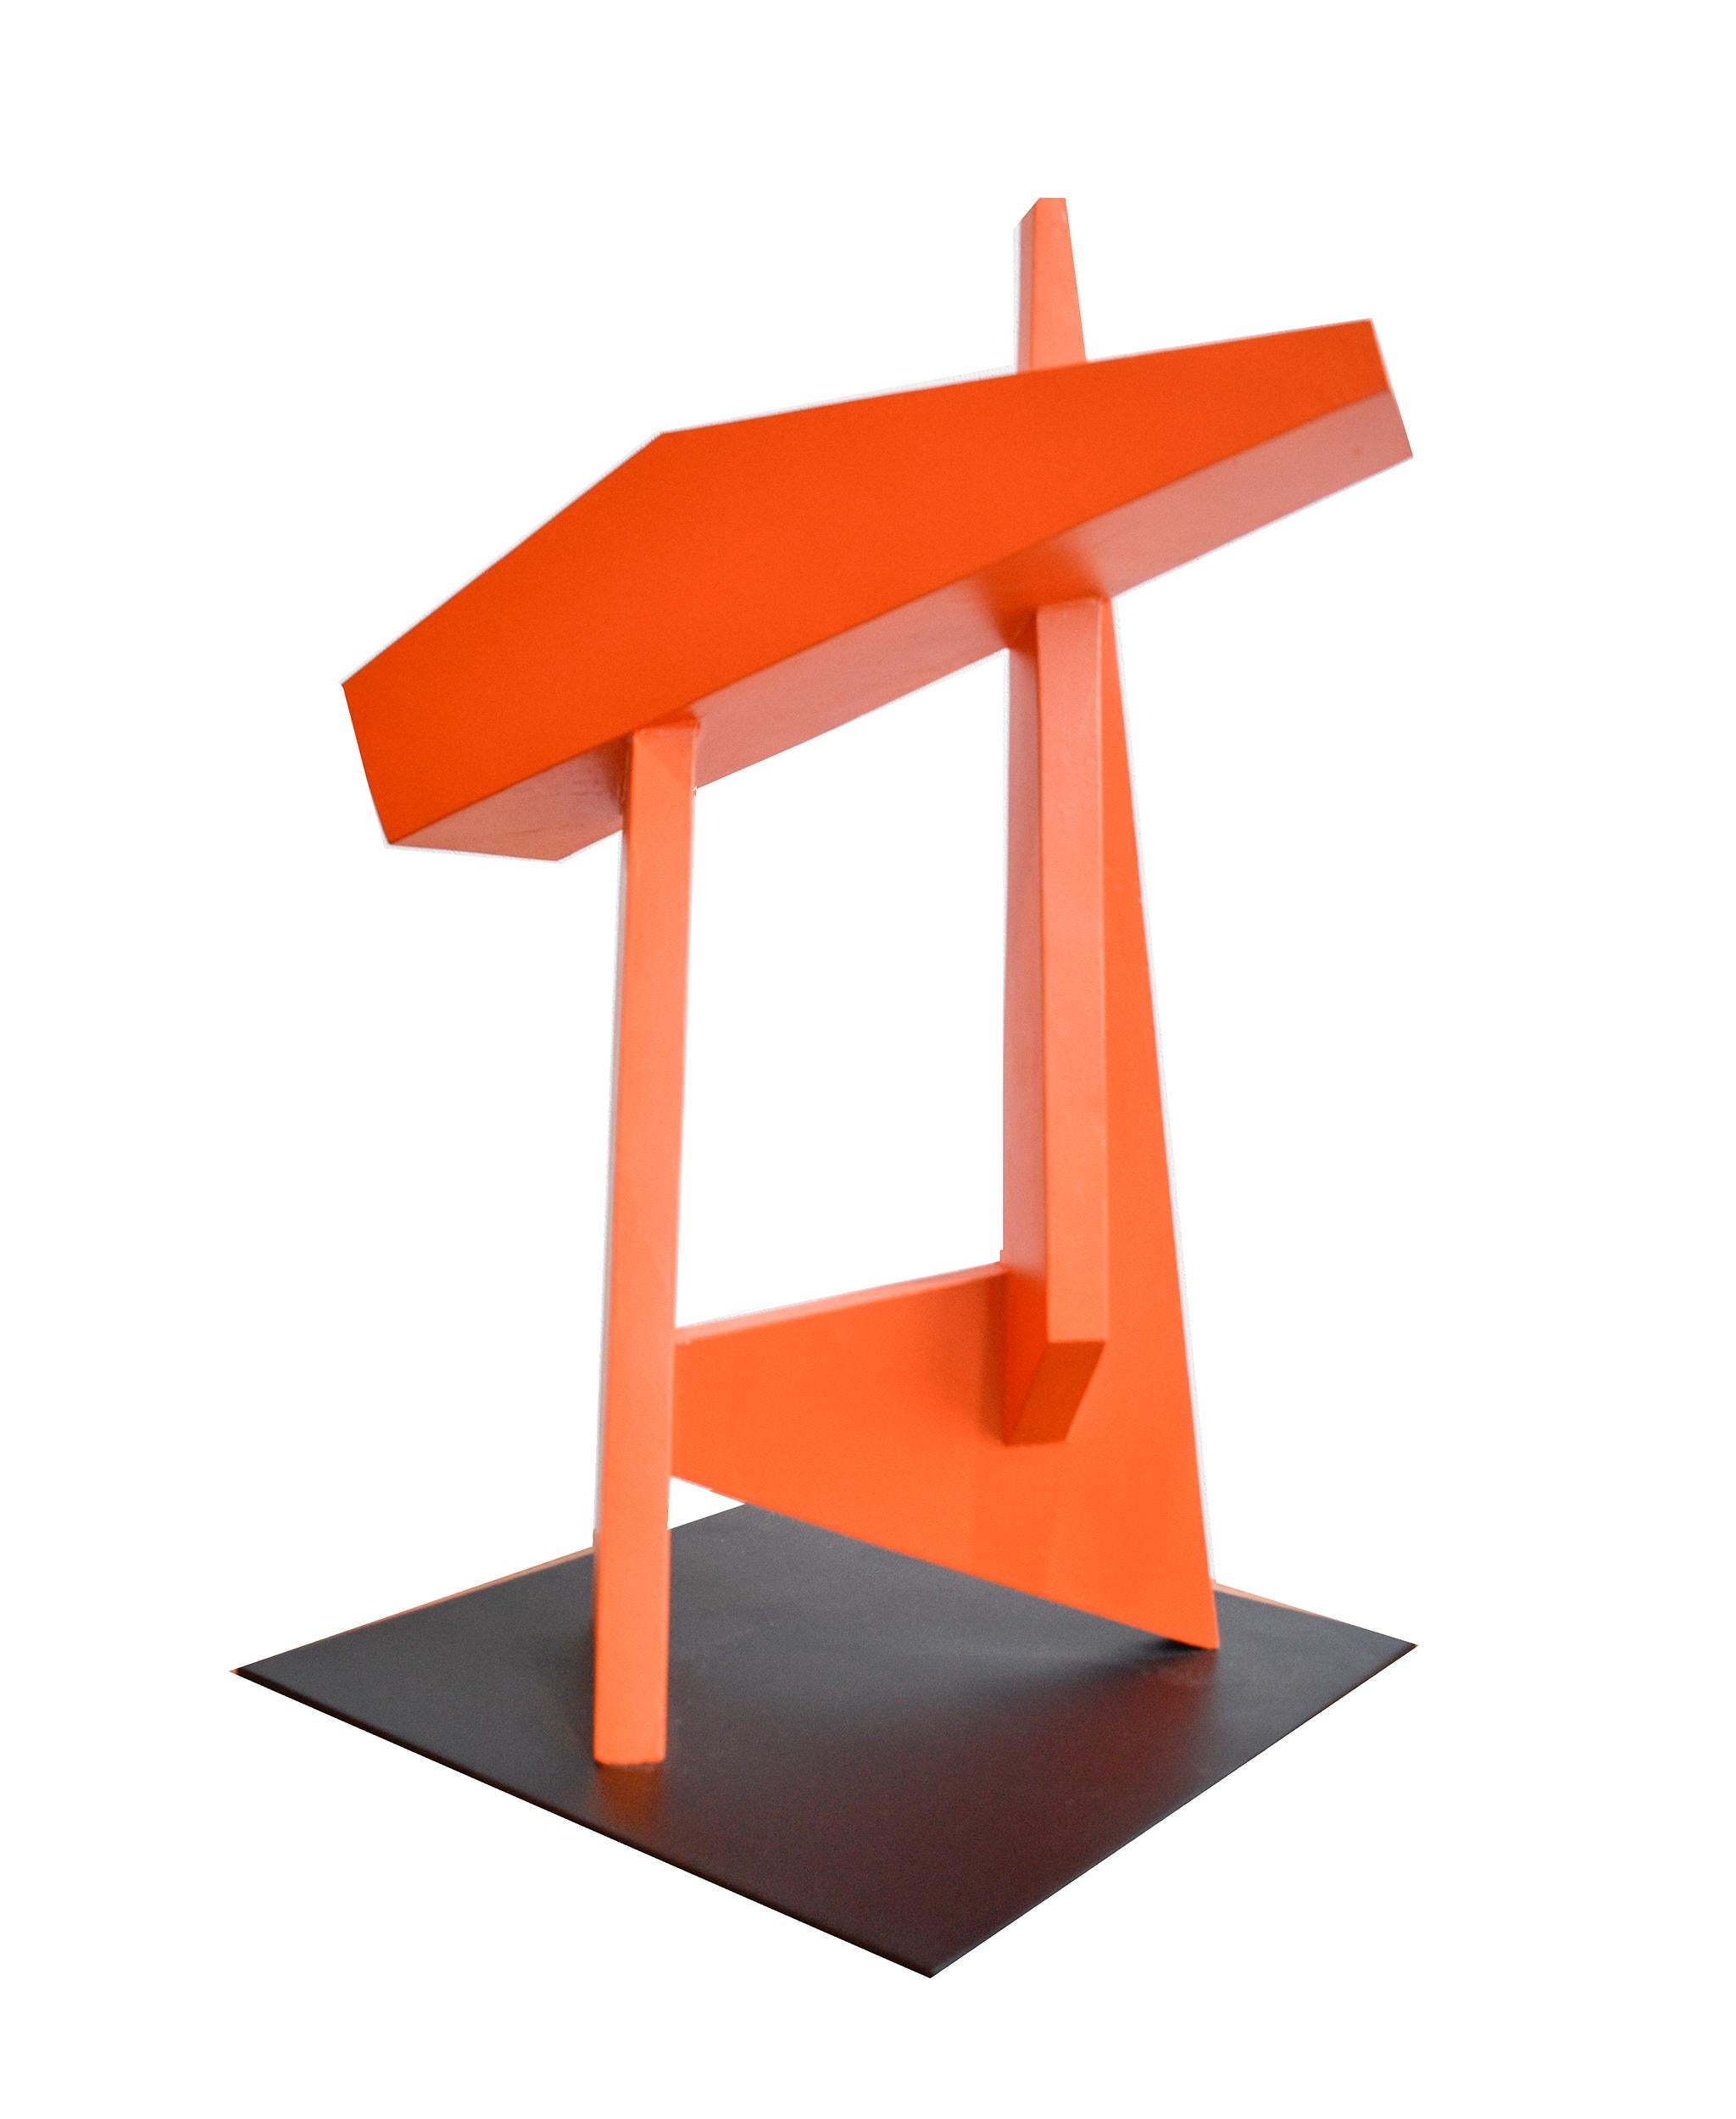 The Gate (Minimalist Abstract New Brutalism Sculpture in Bright Red Orange) 